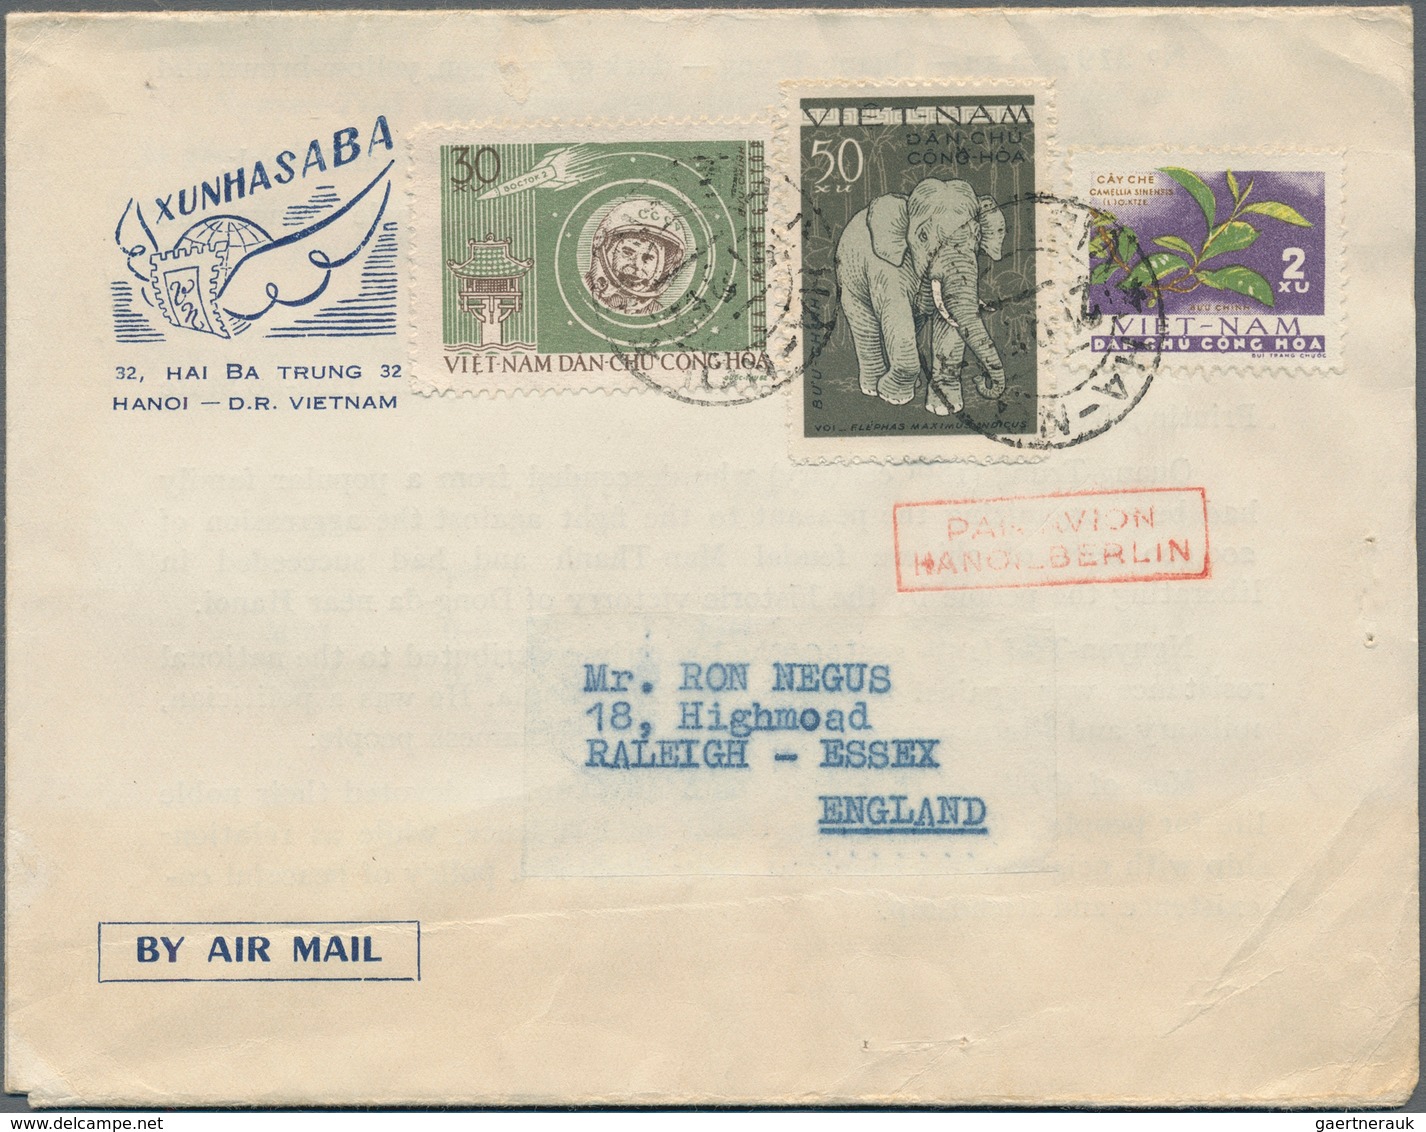 Vietnam-Nord (1945-1975): 1968 (ca.): Mixed Frankings: A) Xunhasaba Letter From 1968 And Franked Wit - Vietnam